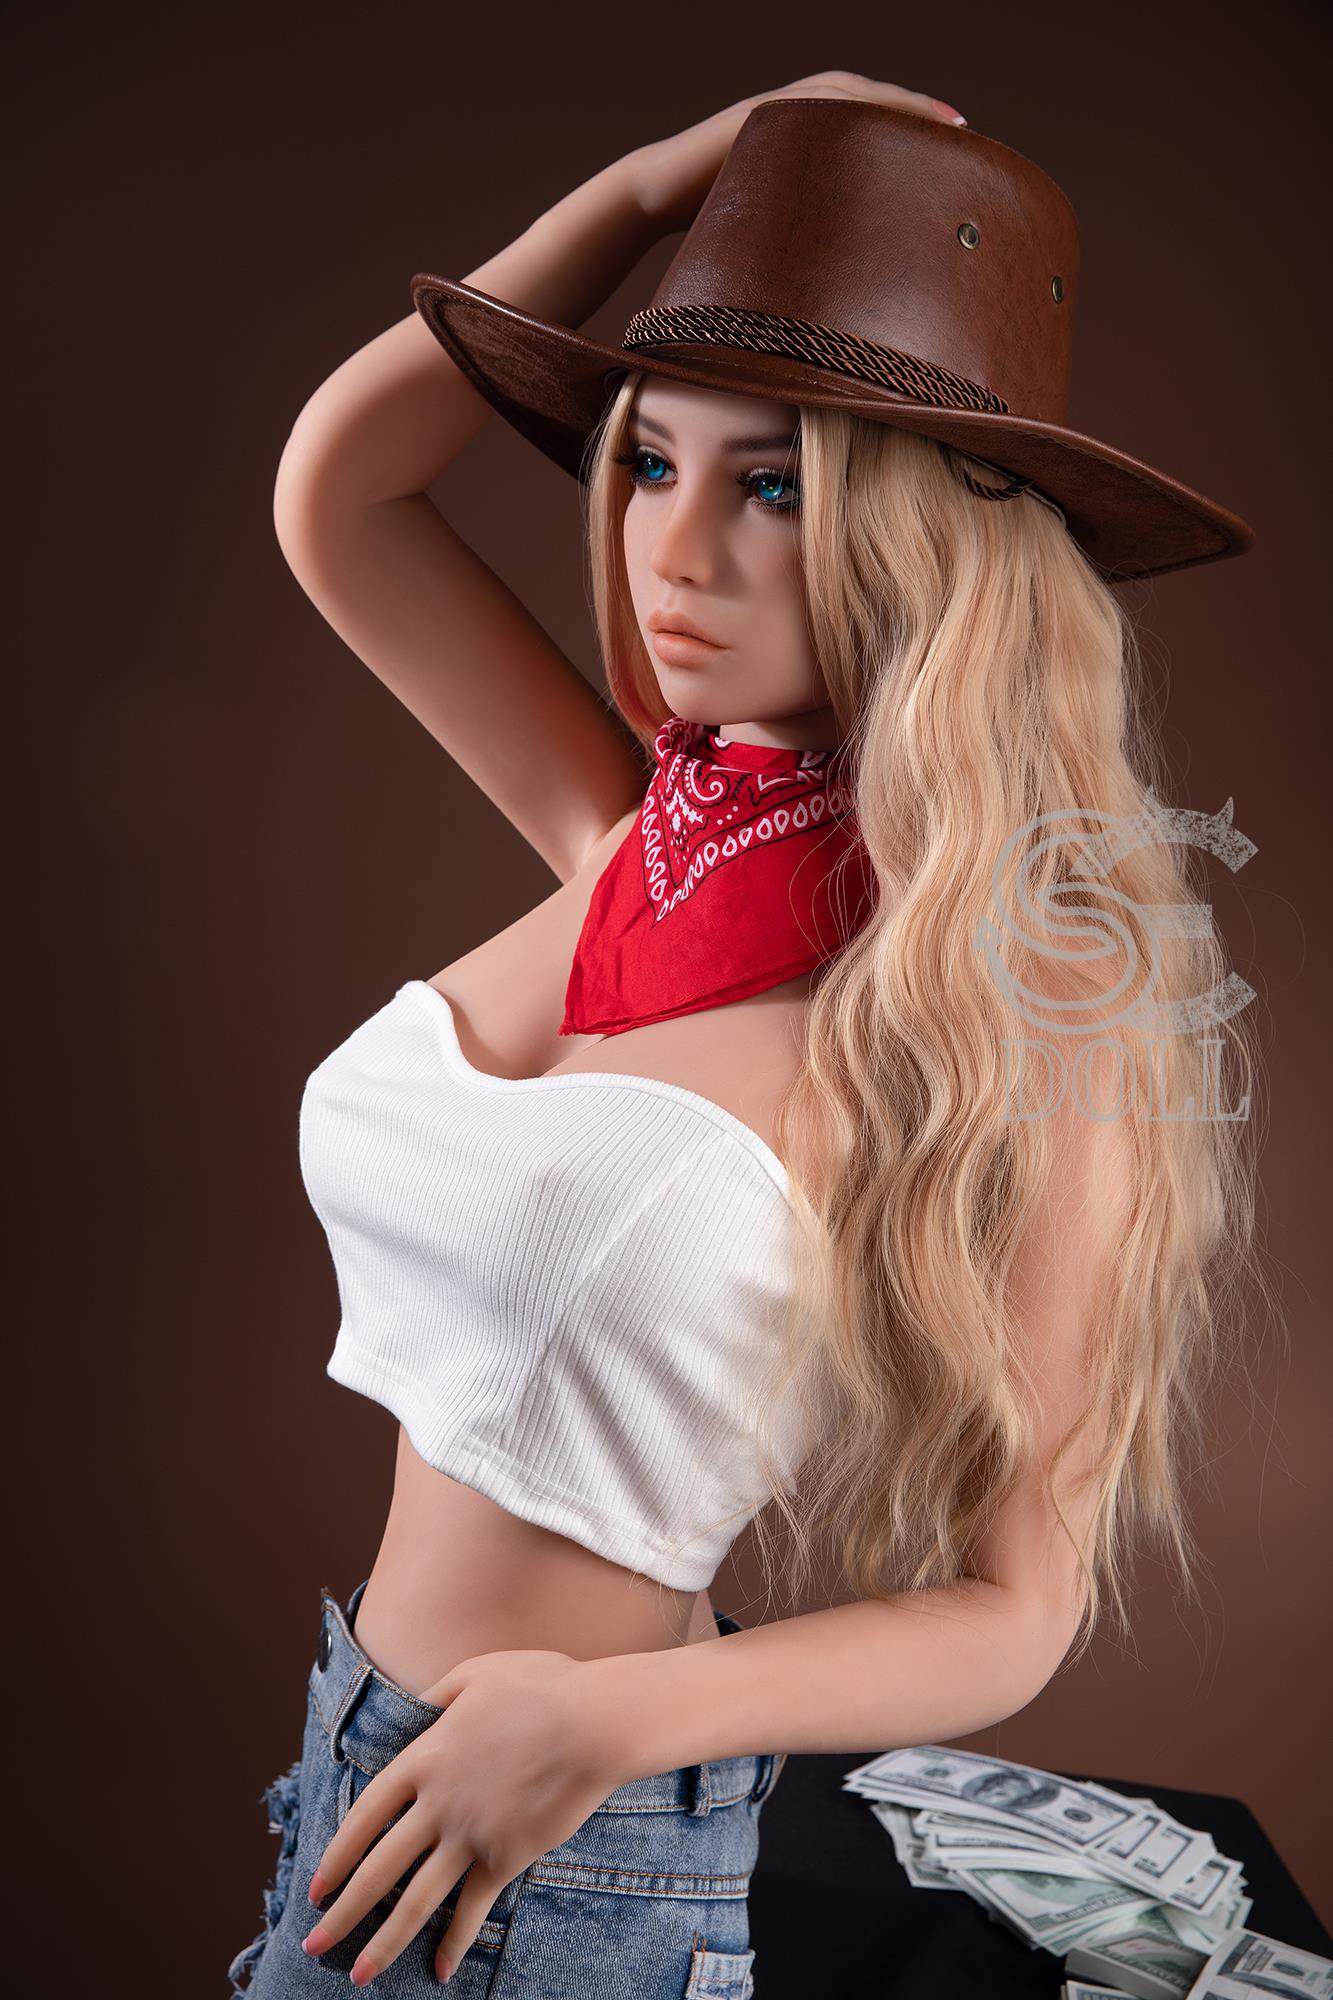 Ready to Ride with Meghan - Blonde TPE Sex Doll in Cowboy Outfit for Wild Intimate Adventures